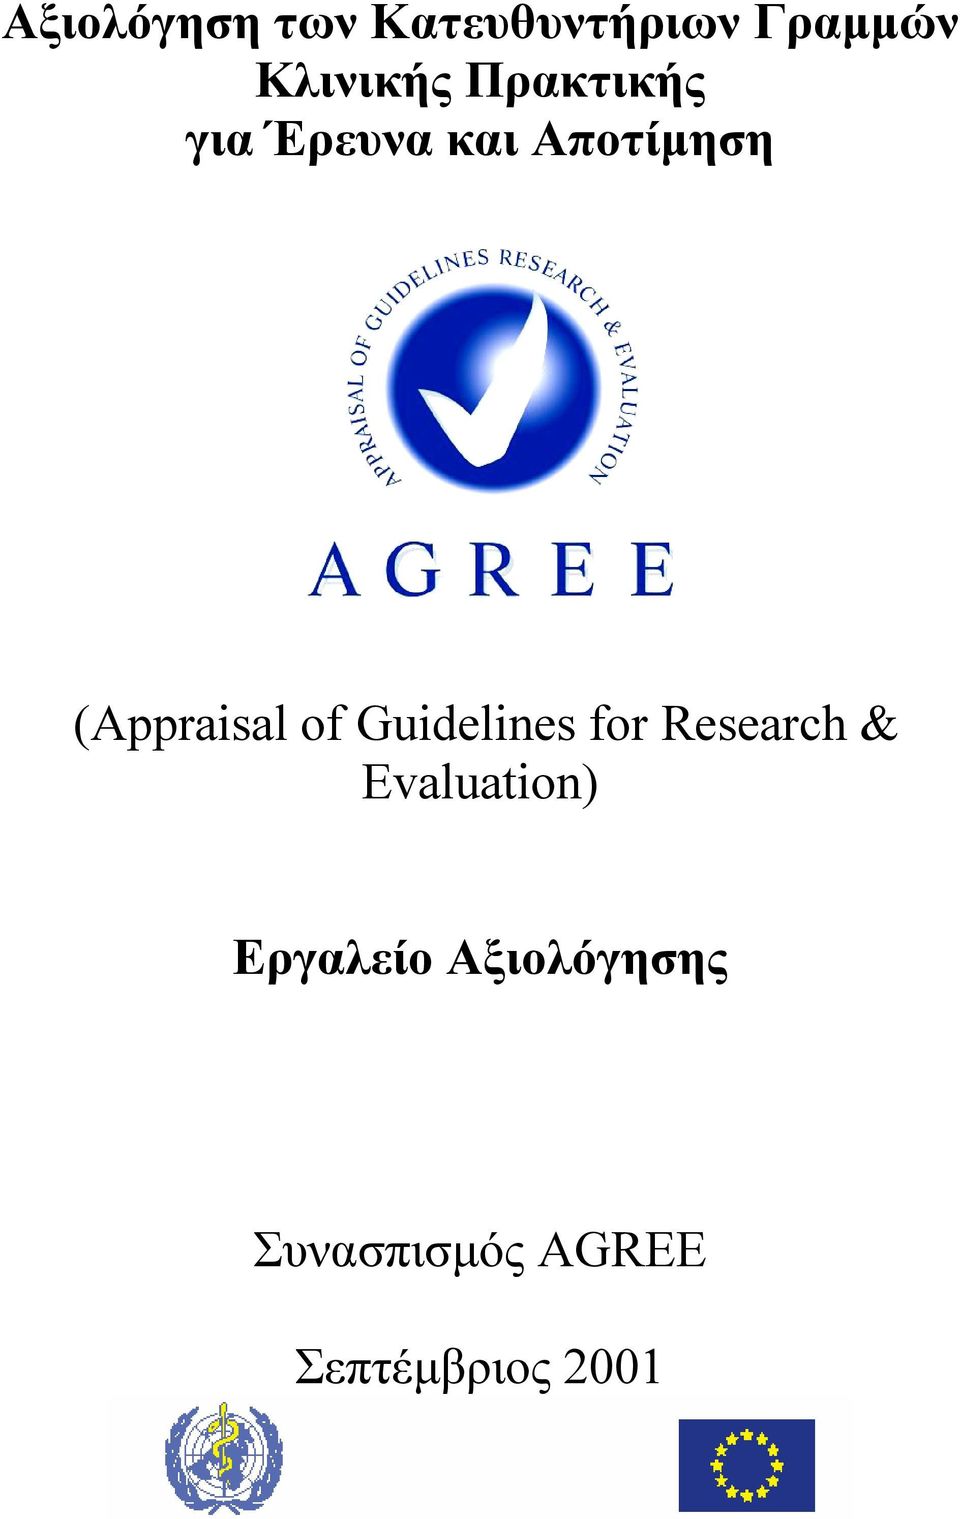 of Guidelines for Research & Evaluation)